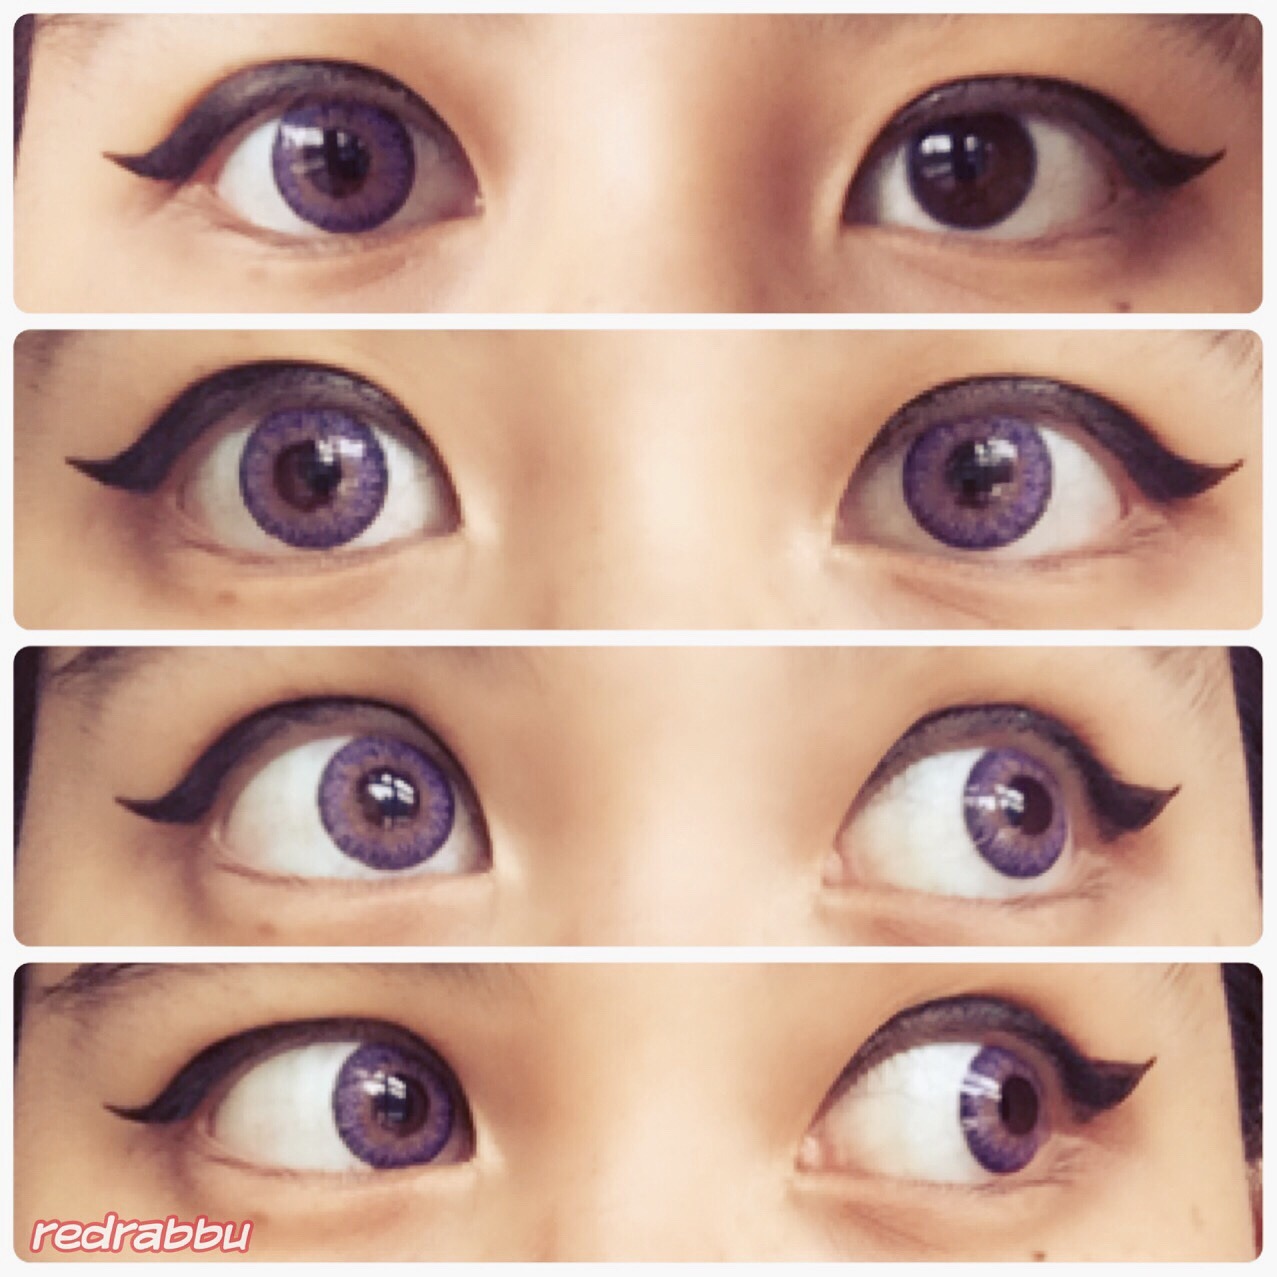 rabbureblogs:  My purple contacts came in so I can finally show my face while in